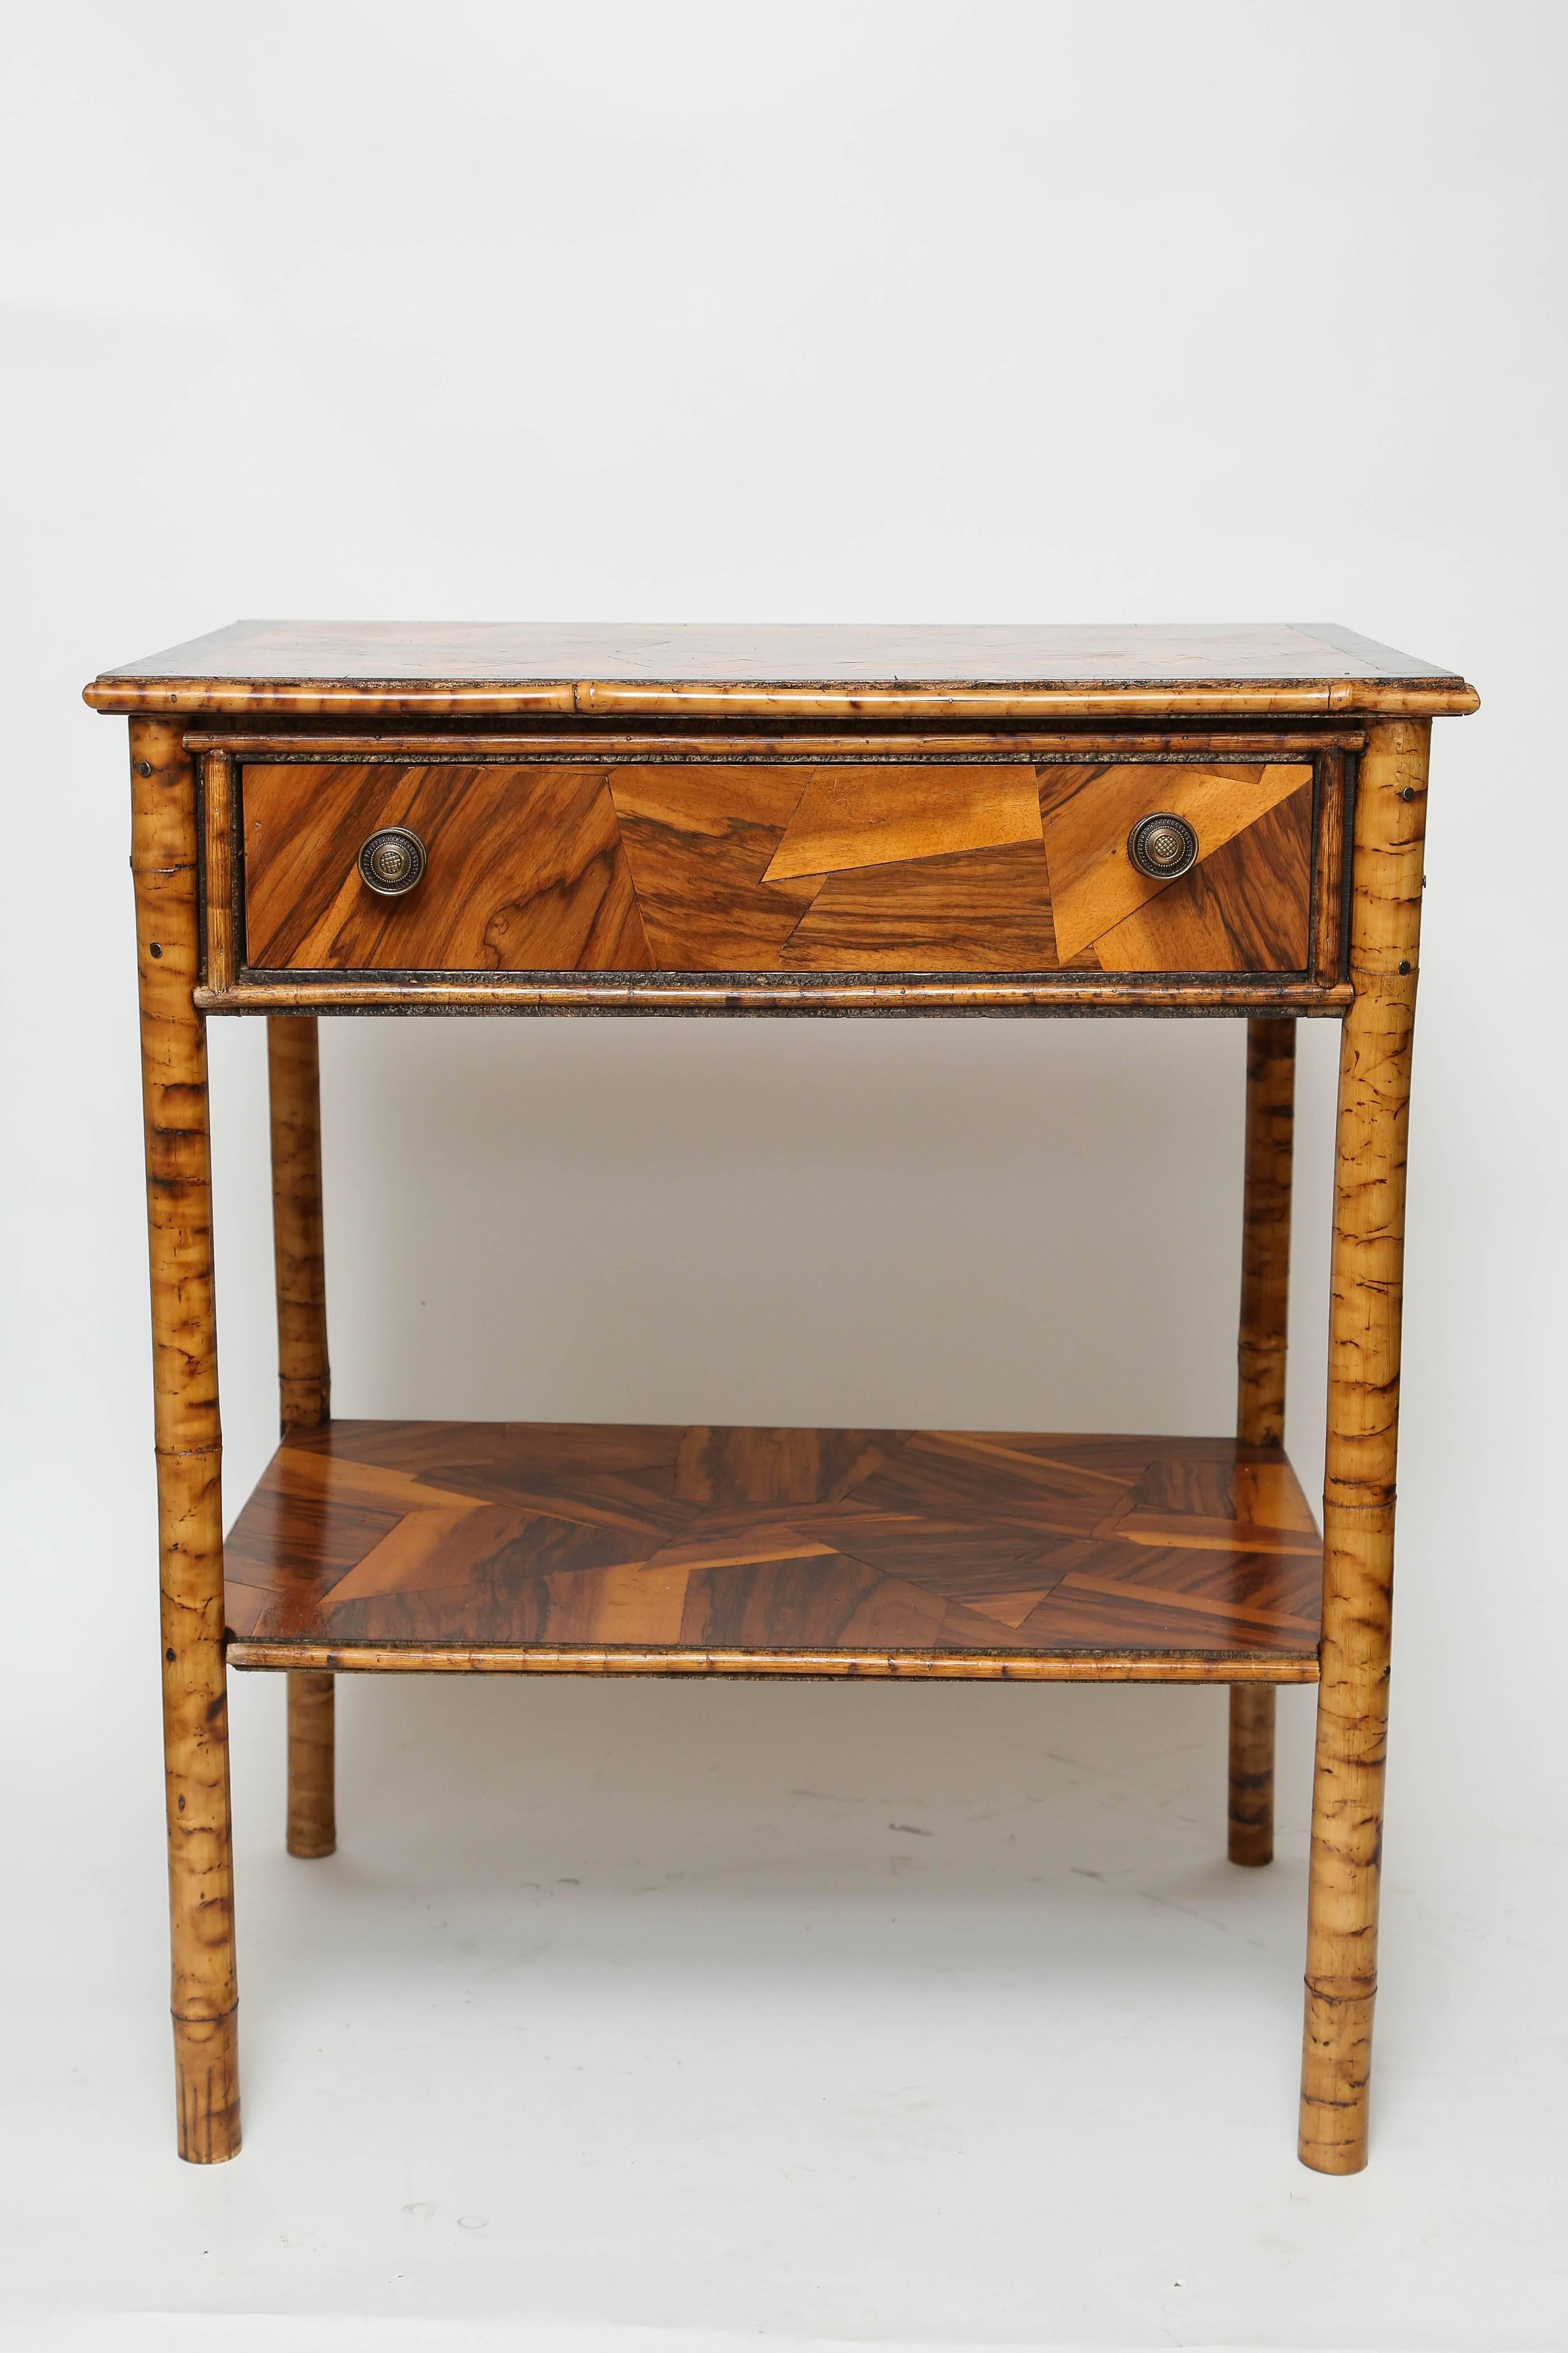 Pair of late 19th century side tables/night stands with one drawer and one shelf.